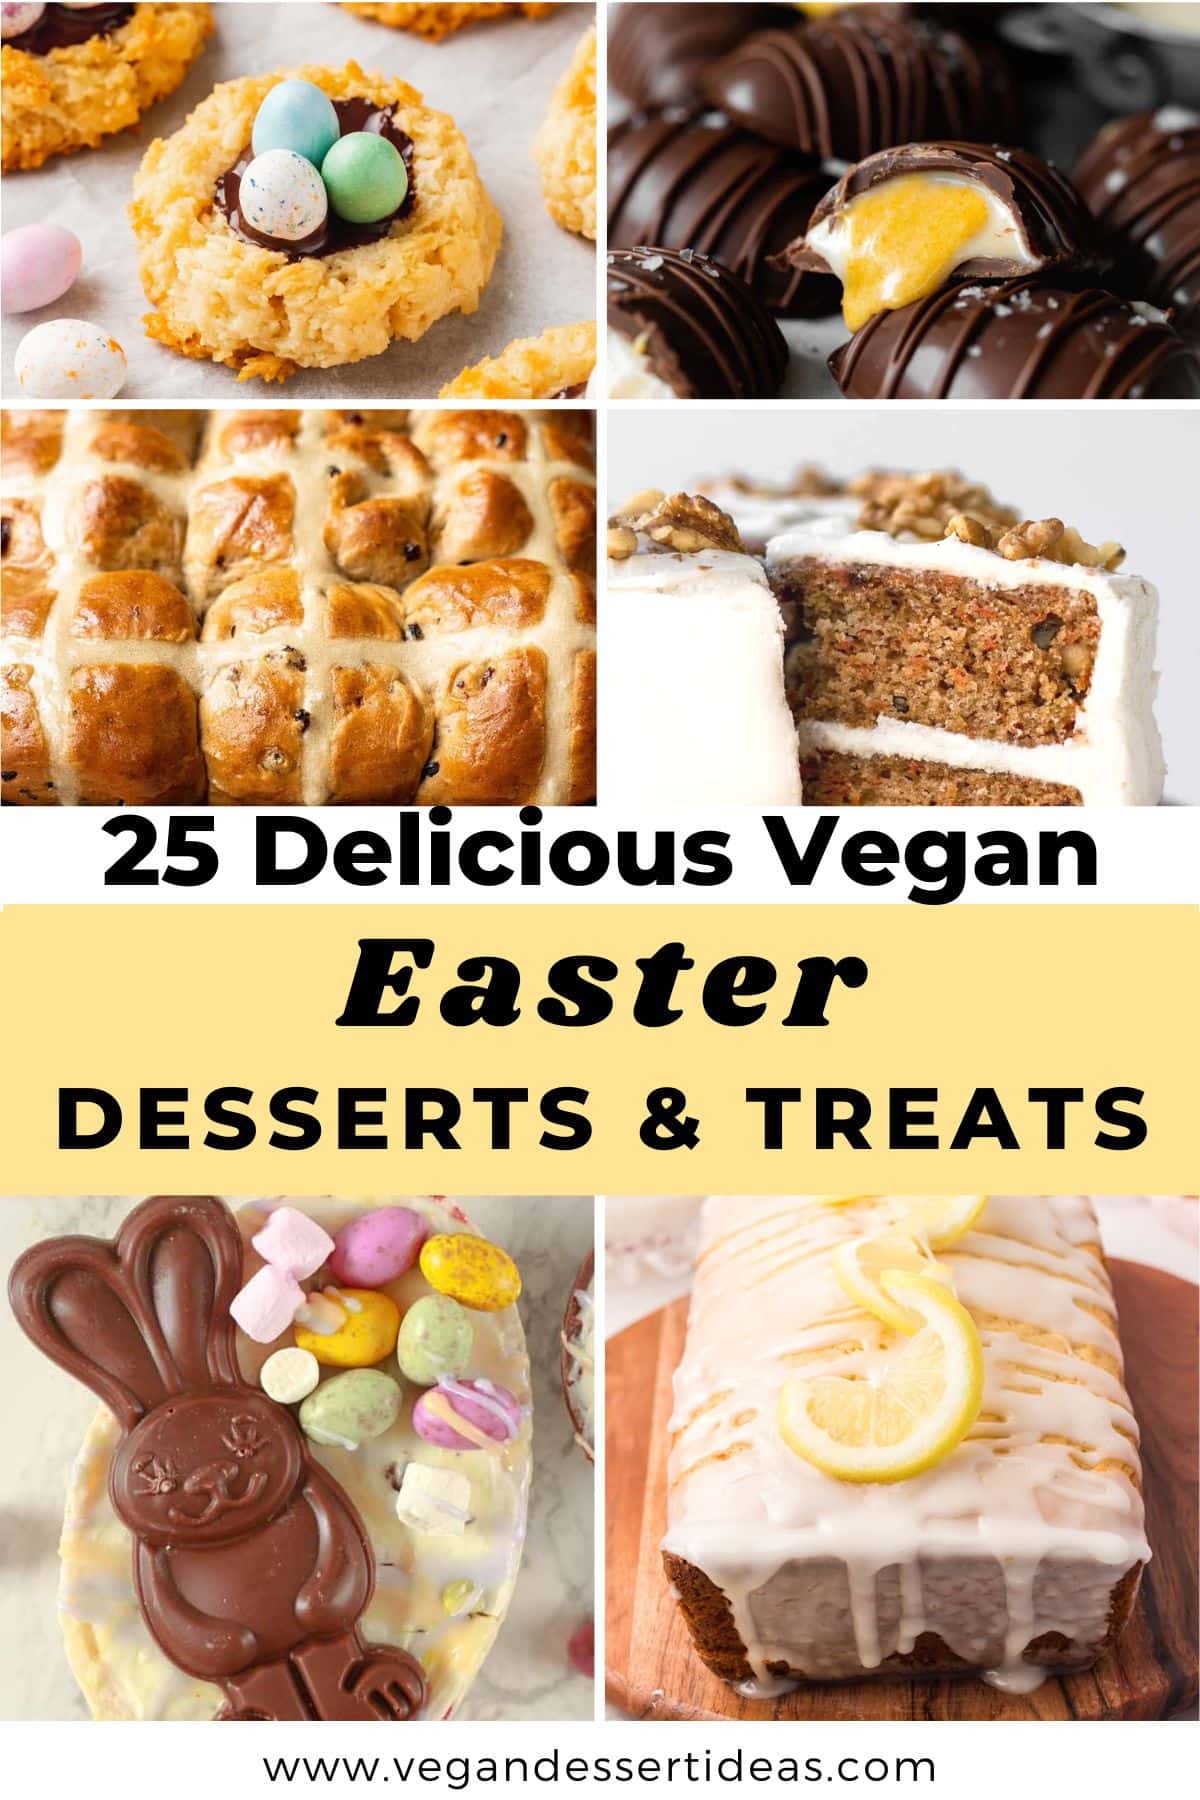 Cookies, candy, buns and cake "25 Delicious Vegan Easter Desserts & Treats"